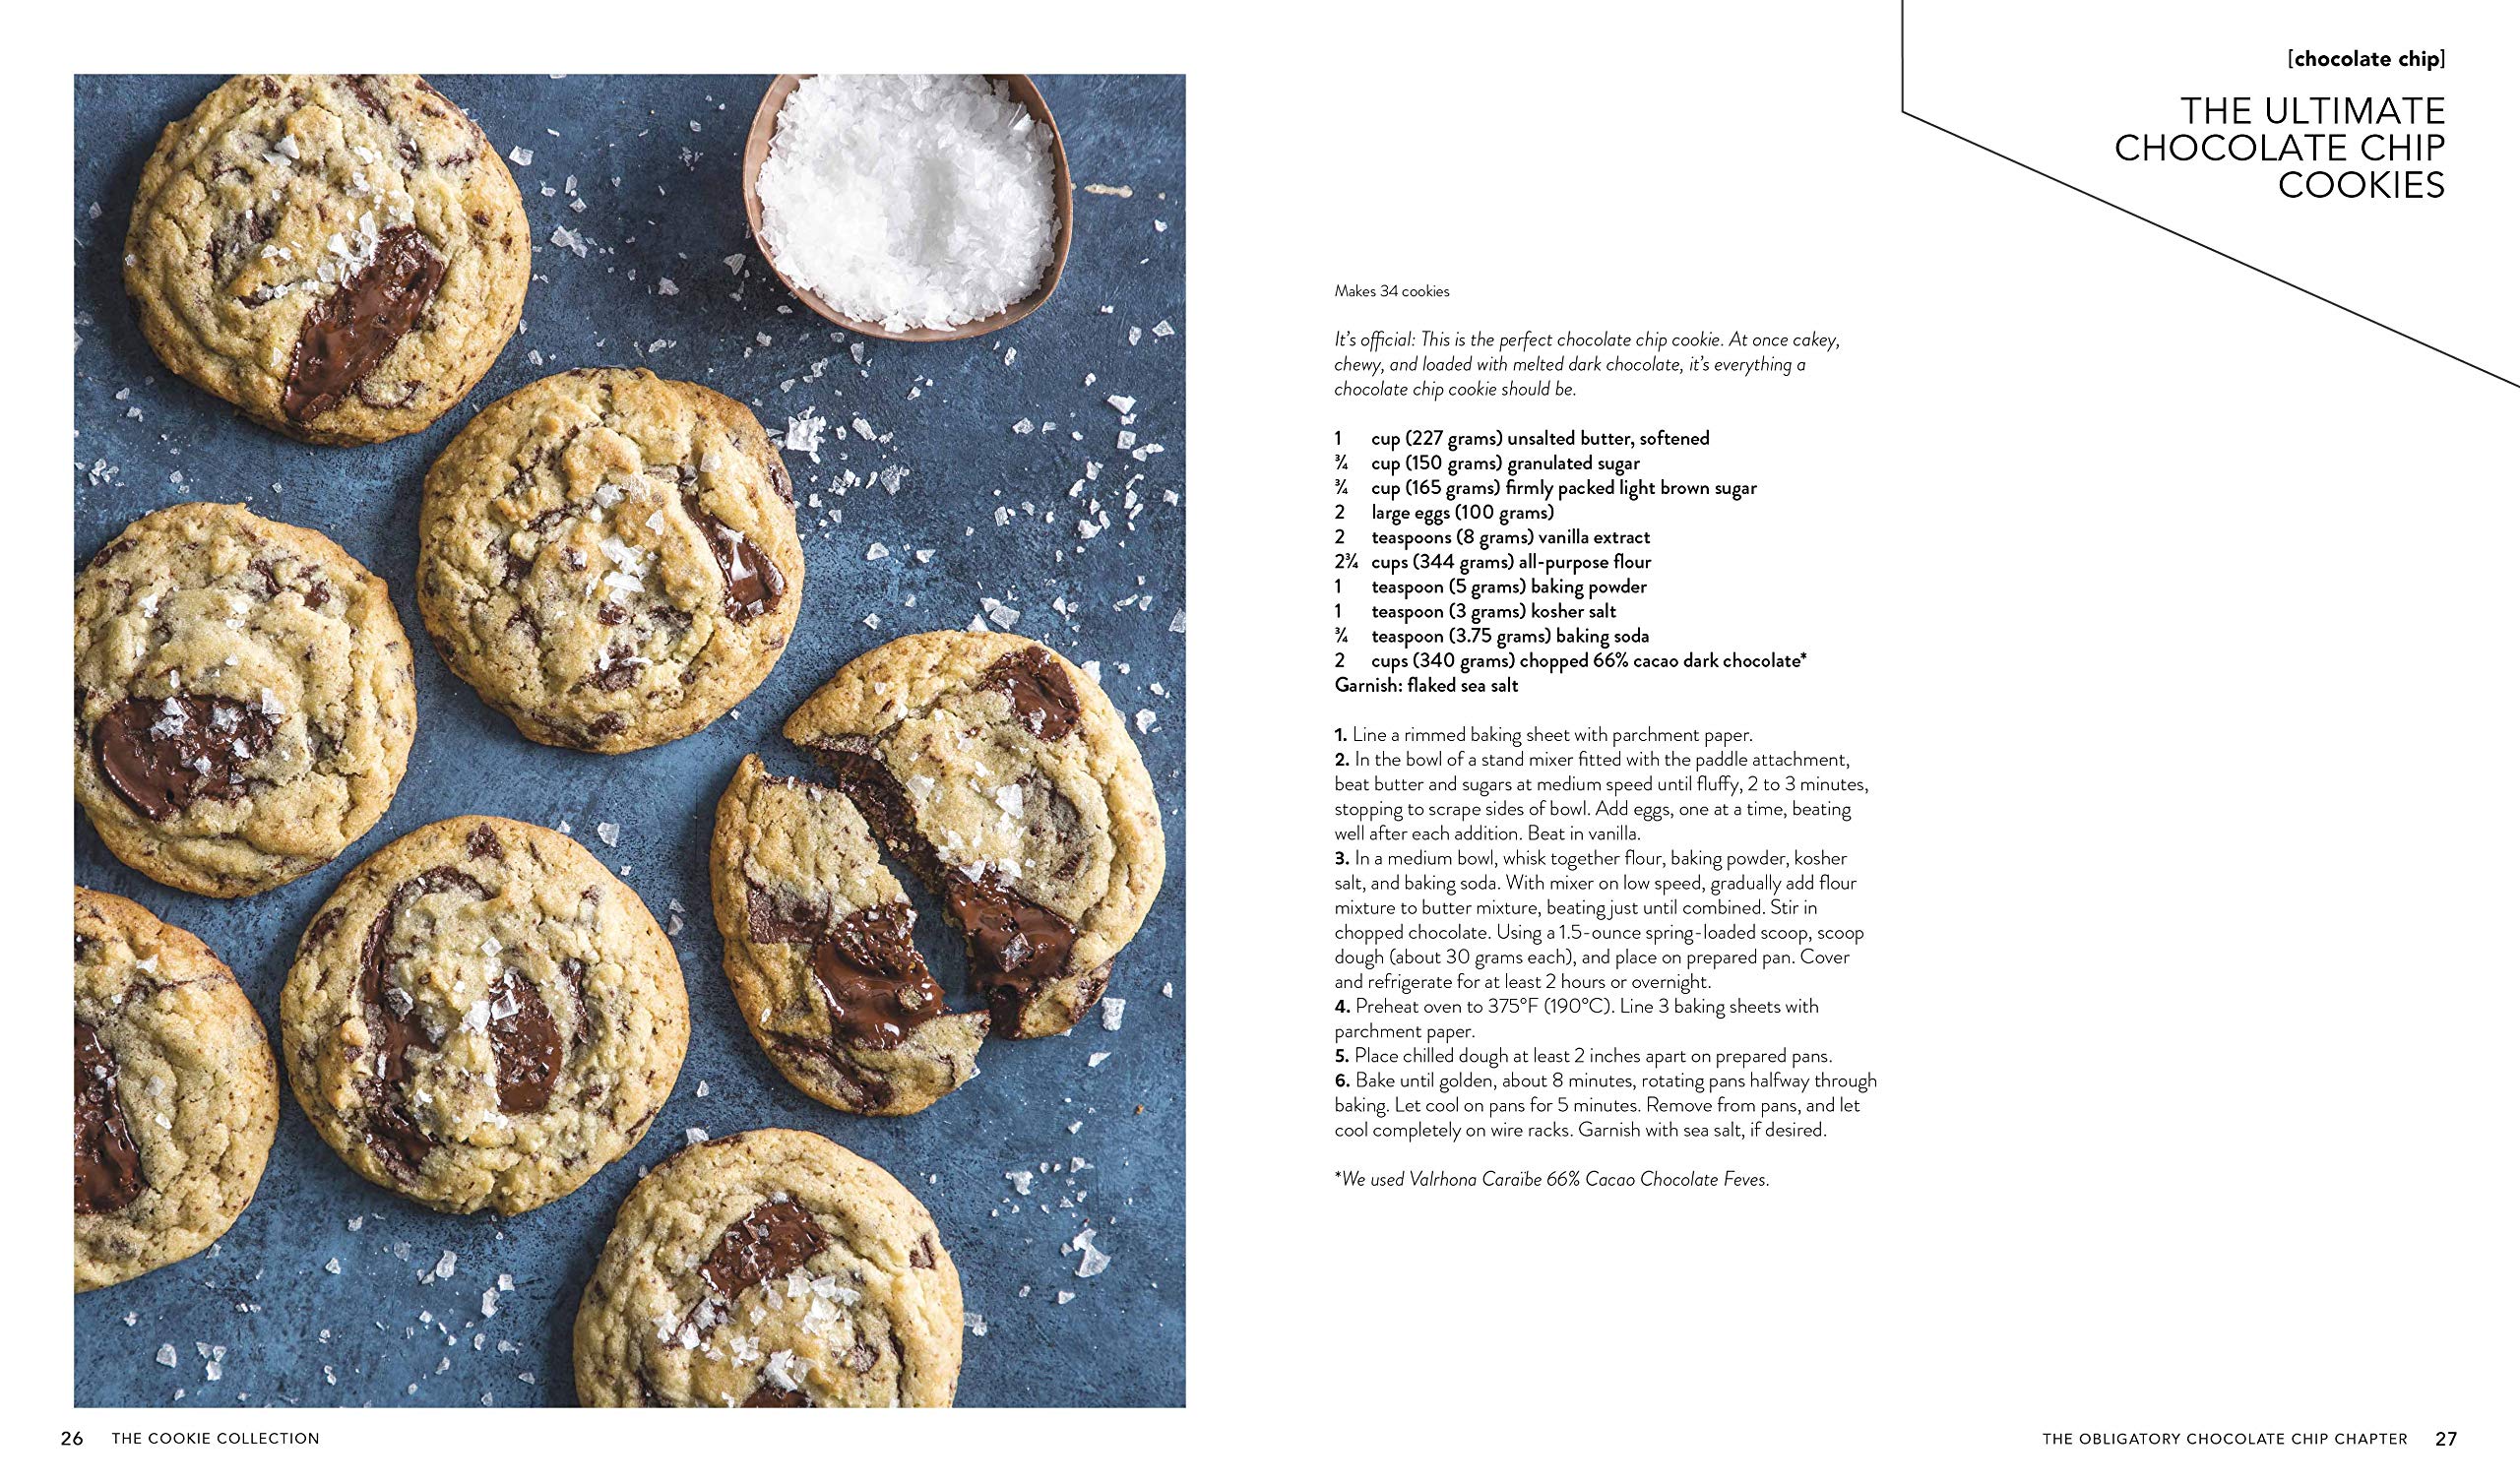 The Cookie Collection: Artisan Baking for the Cookie Enthusiast (The Bake Feed)